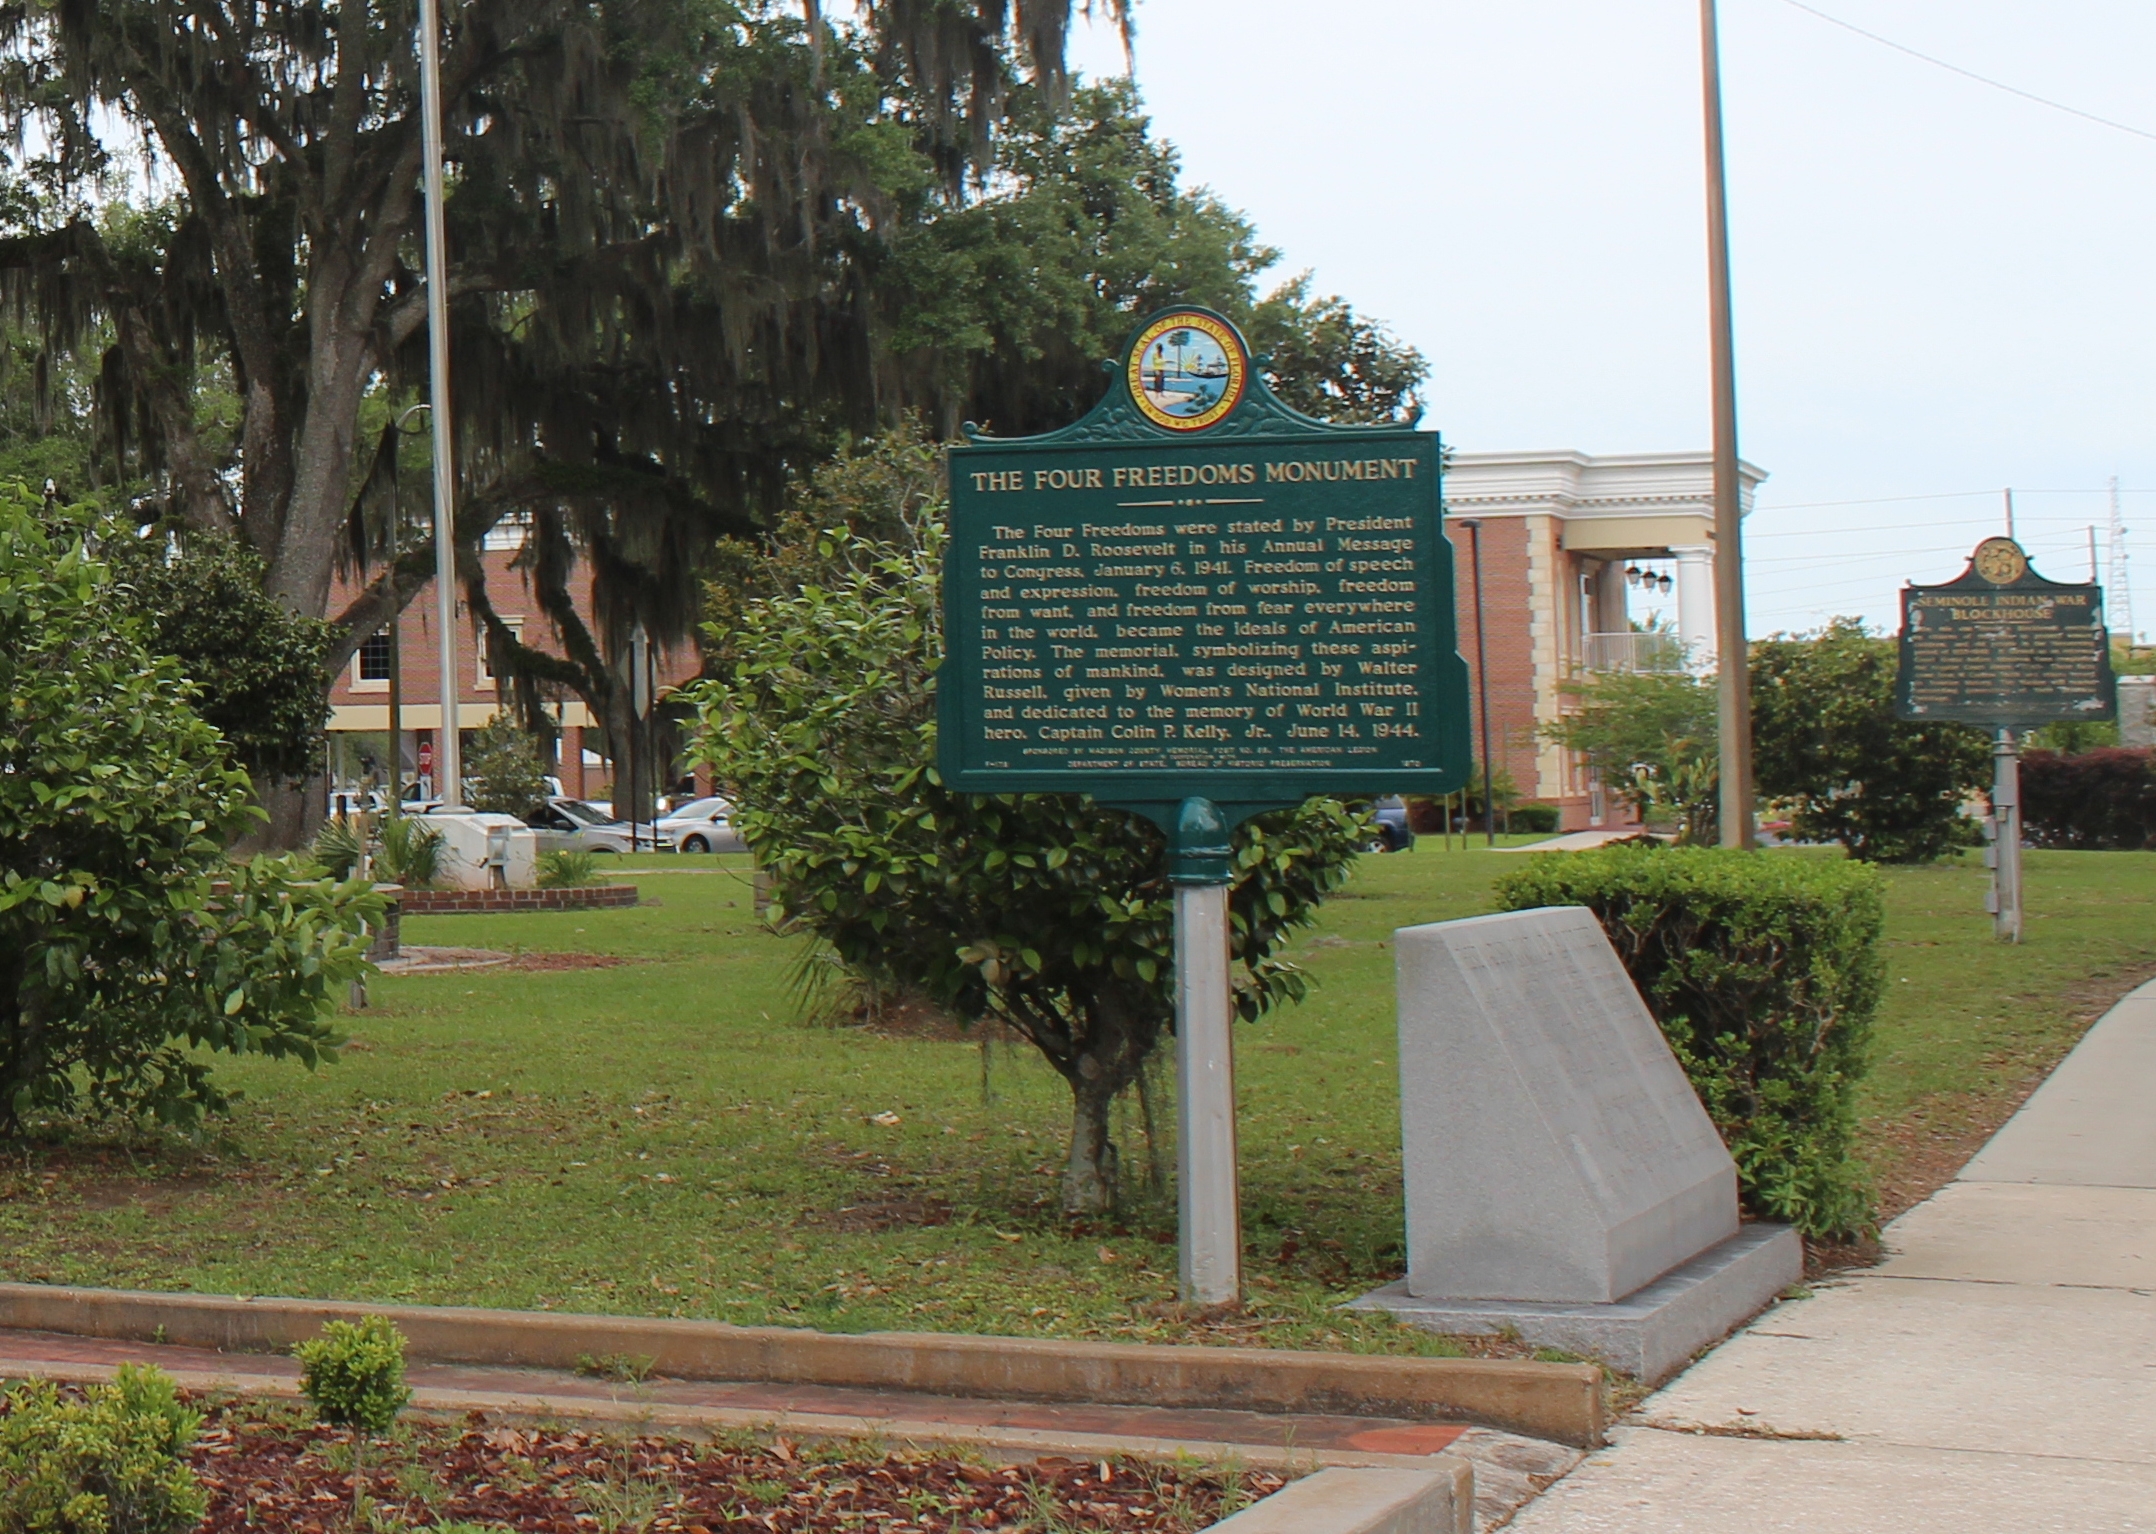 Seminole Indian War Blockhouse Marker in background with Four Freedoms Monument Marker in foreground